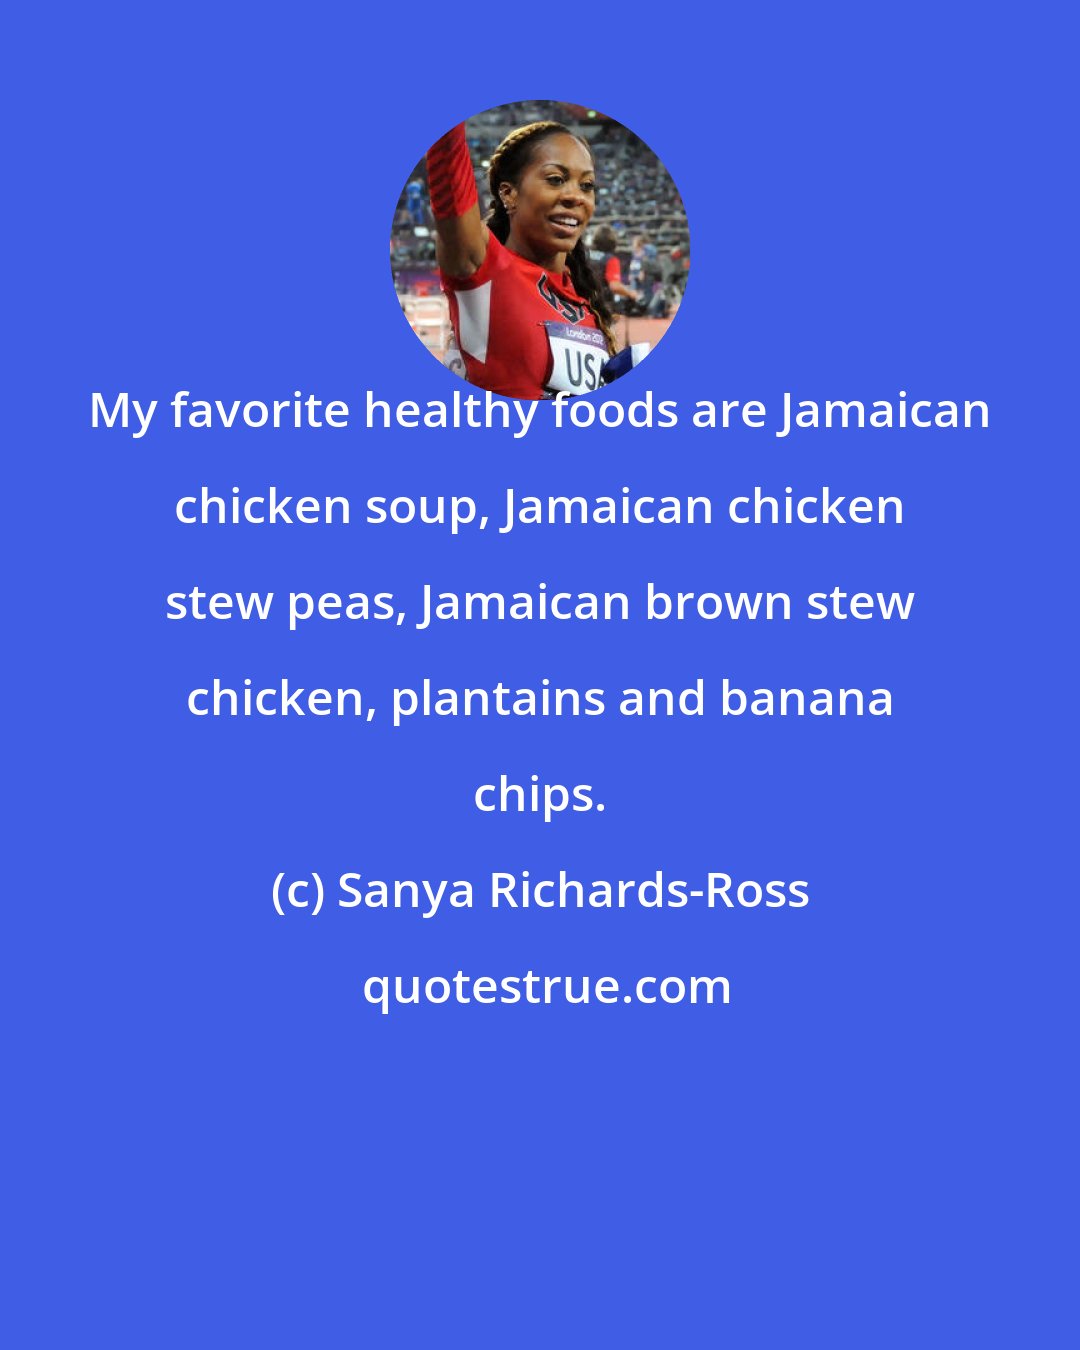 Sanya Richards-Ross: My favorite healthy foods are Jamaican chicken soup, Jamaican chicken stew peas, Jamaican brown stew chicken, plantains and banana chips.